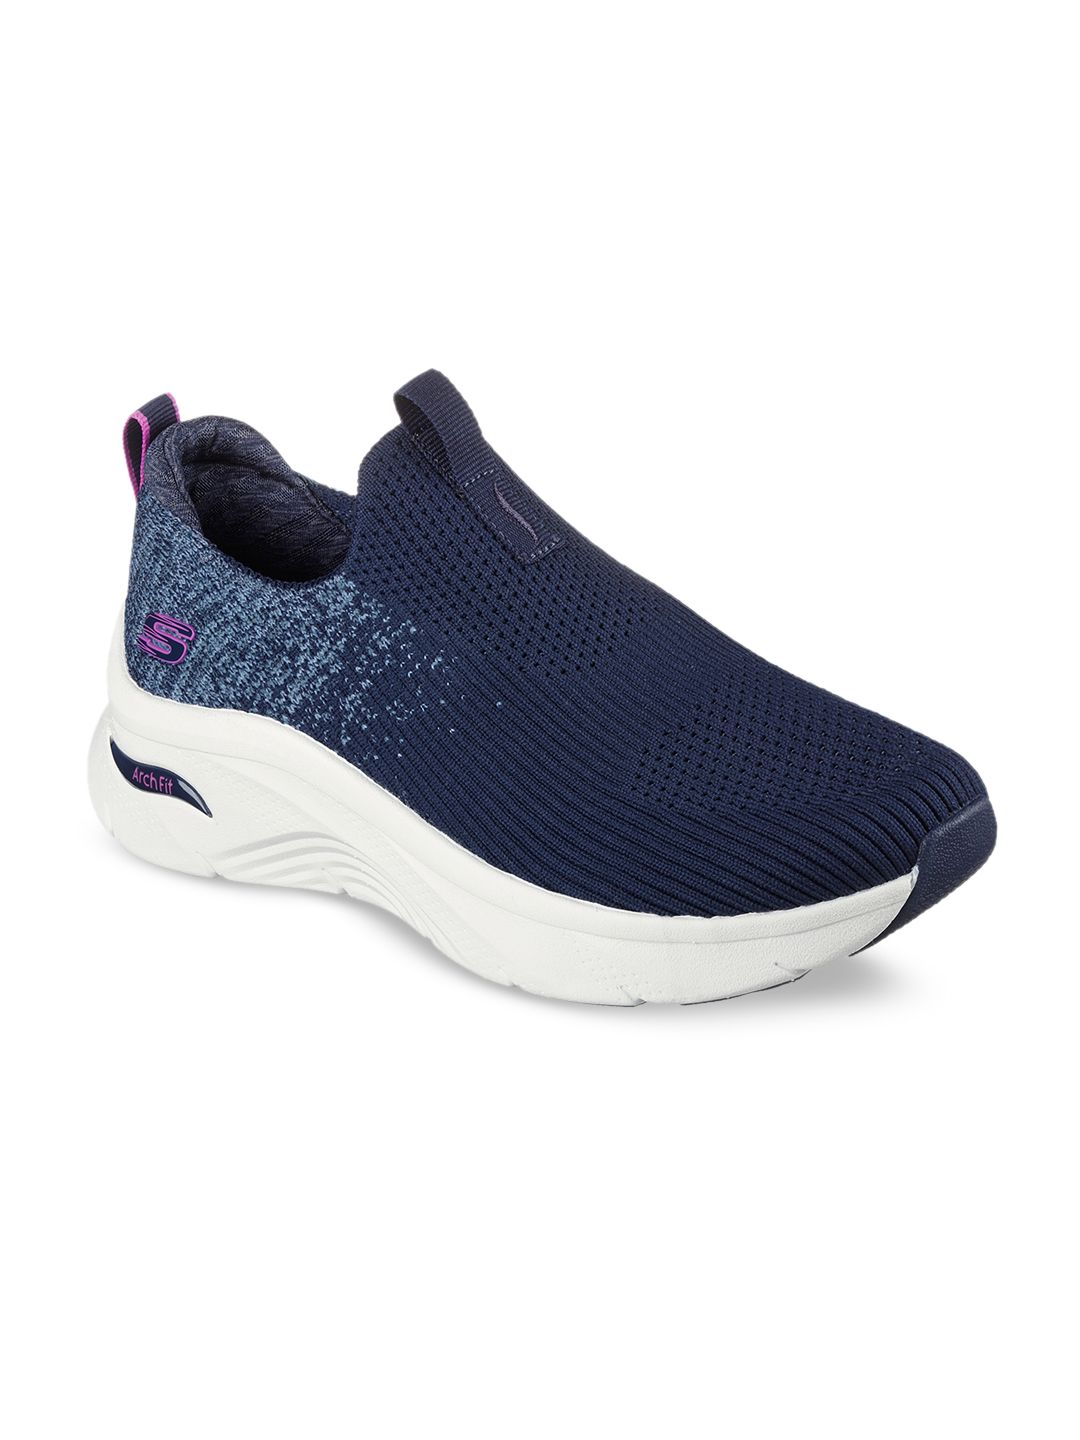 Skechers Women ARCH FIT D'LUX-JOURNEY Slip On Sneakers Price in India ...